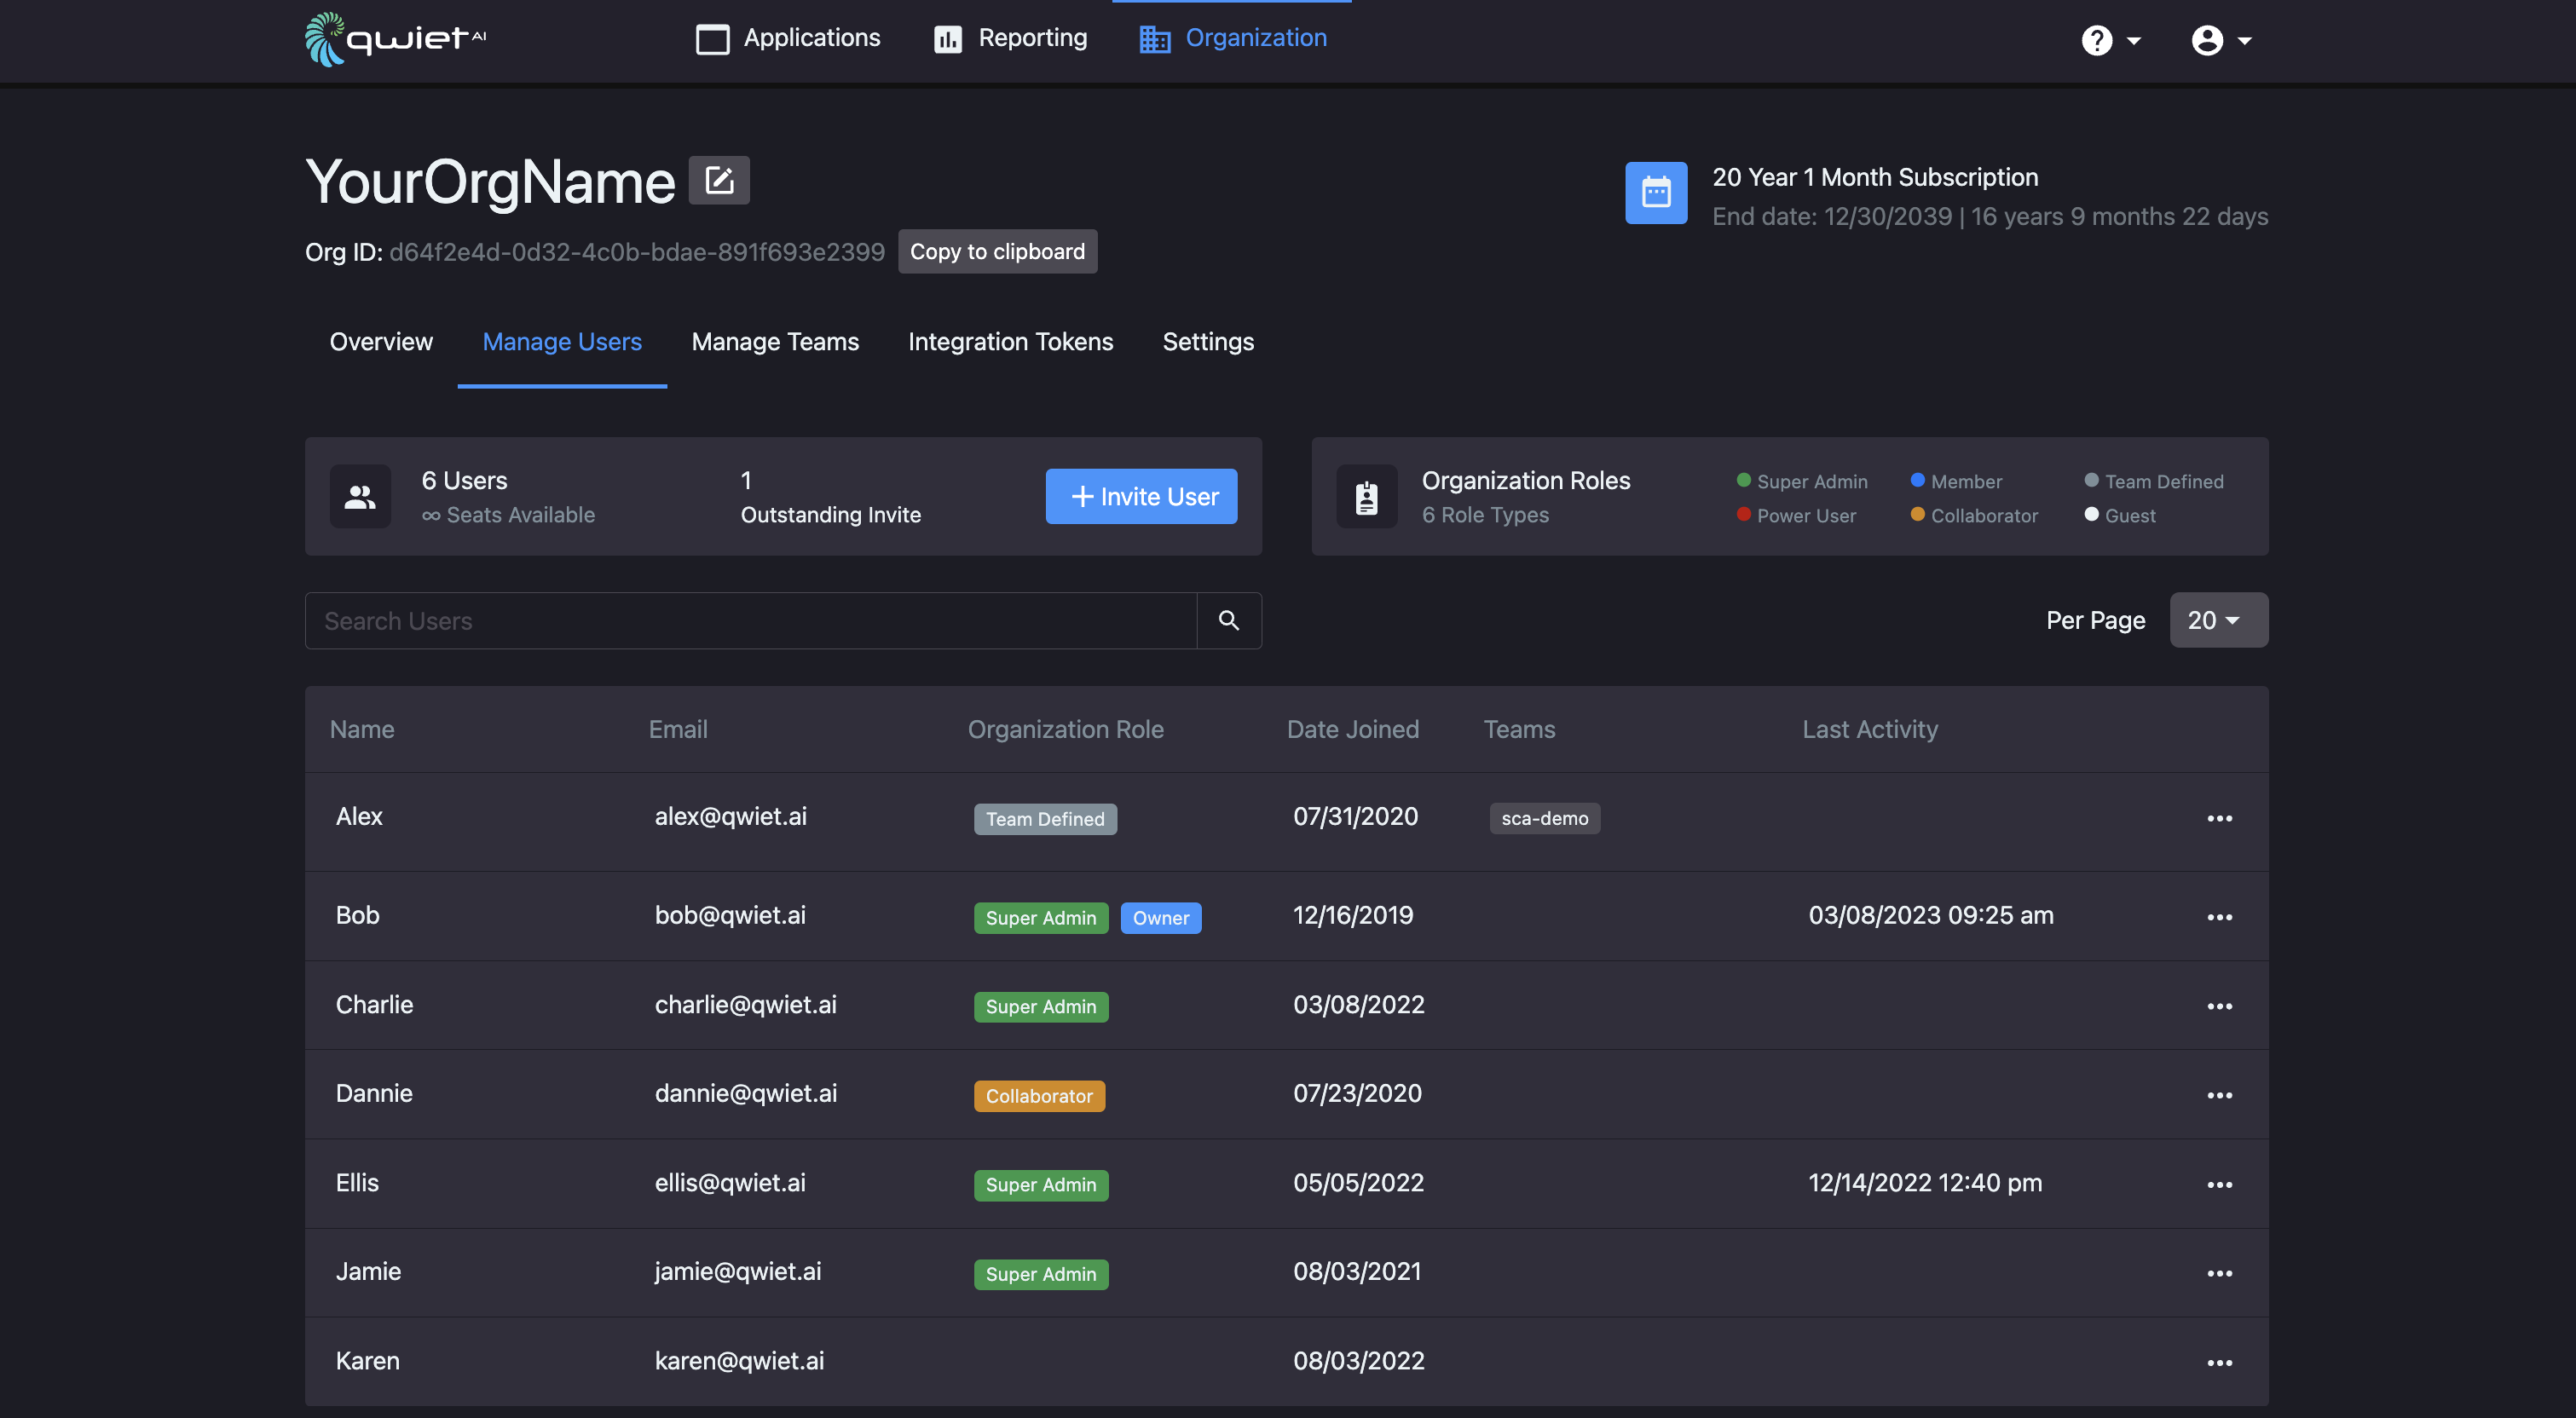 A view of the dashboard's Manage Users page